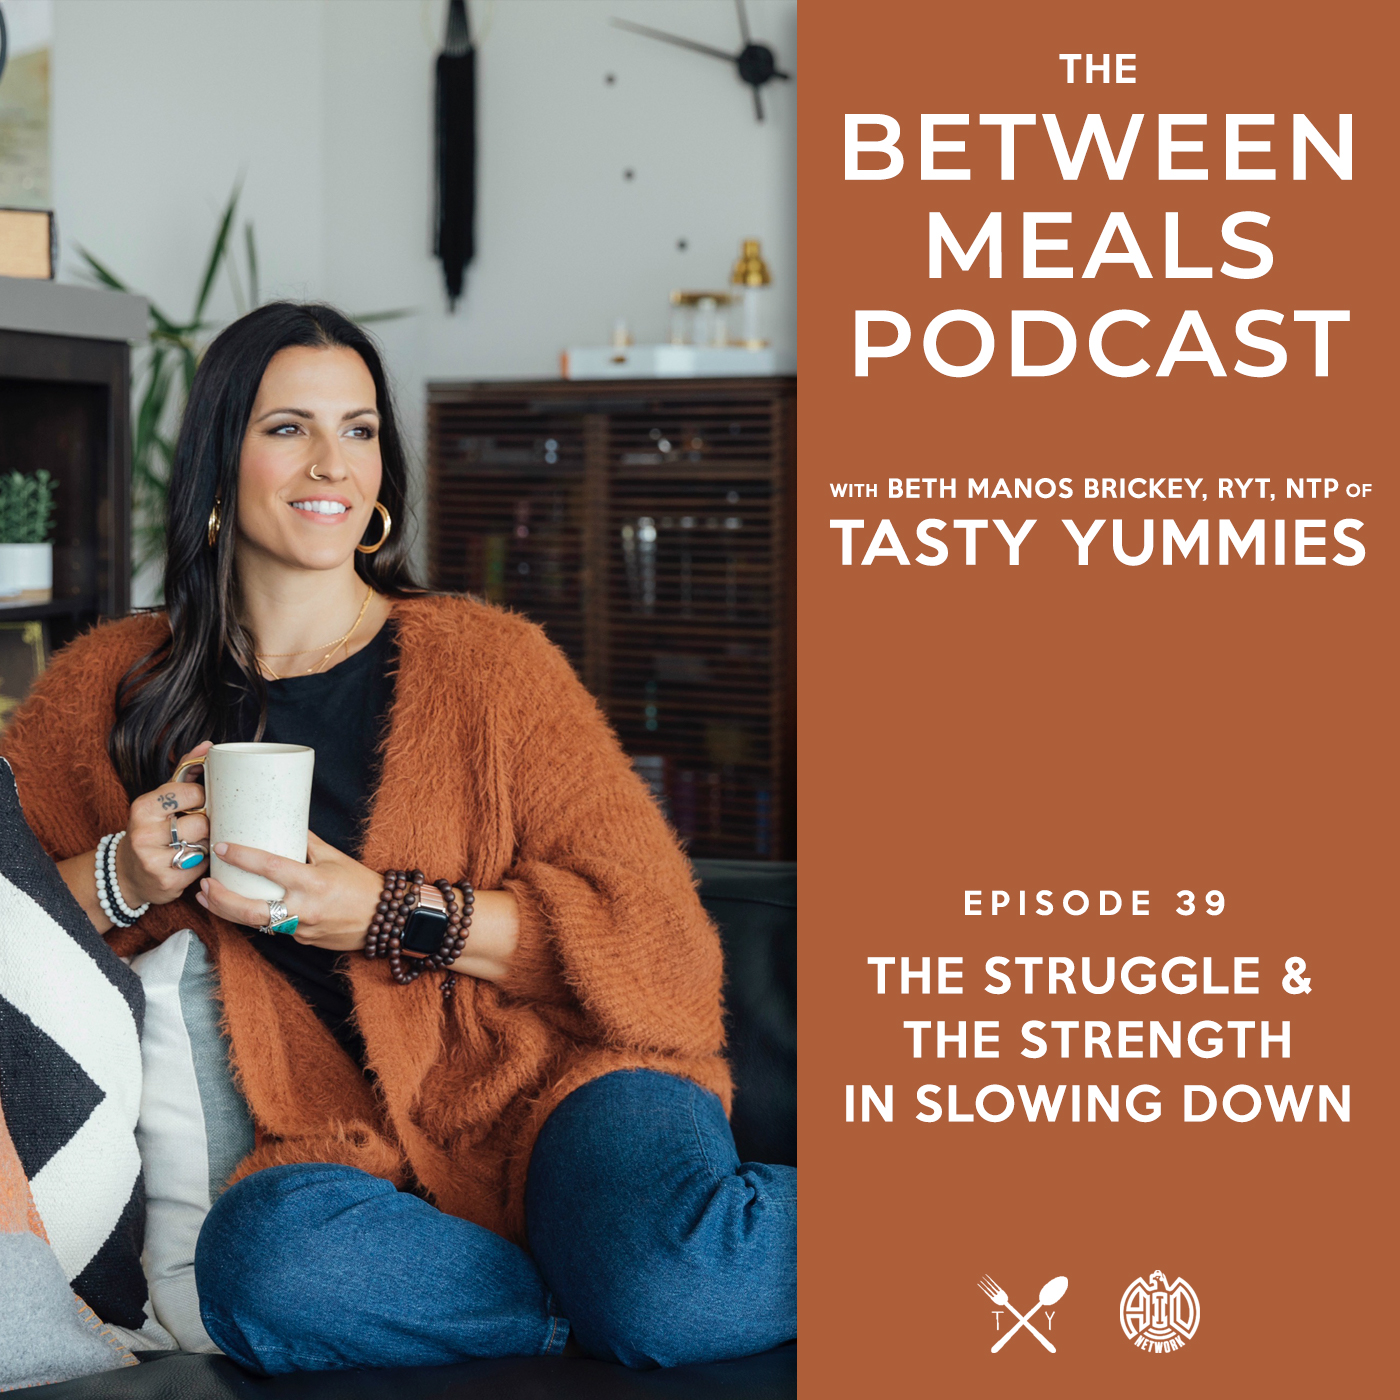 Between Meals Podcast. Episode 39: The Struggle and The Strength in Slowing Down